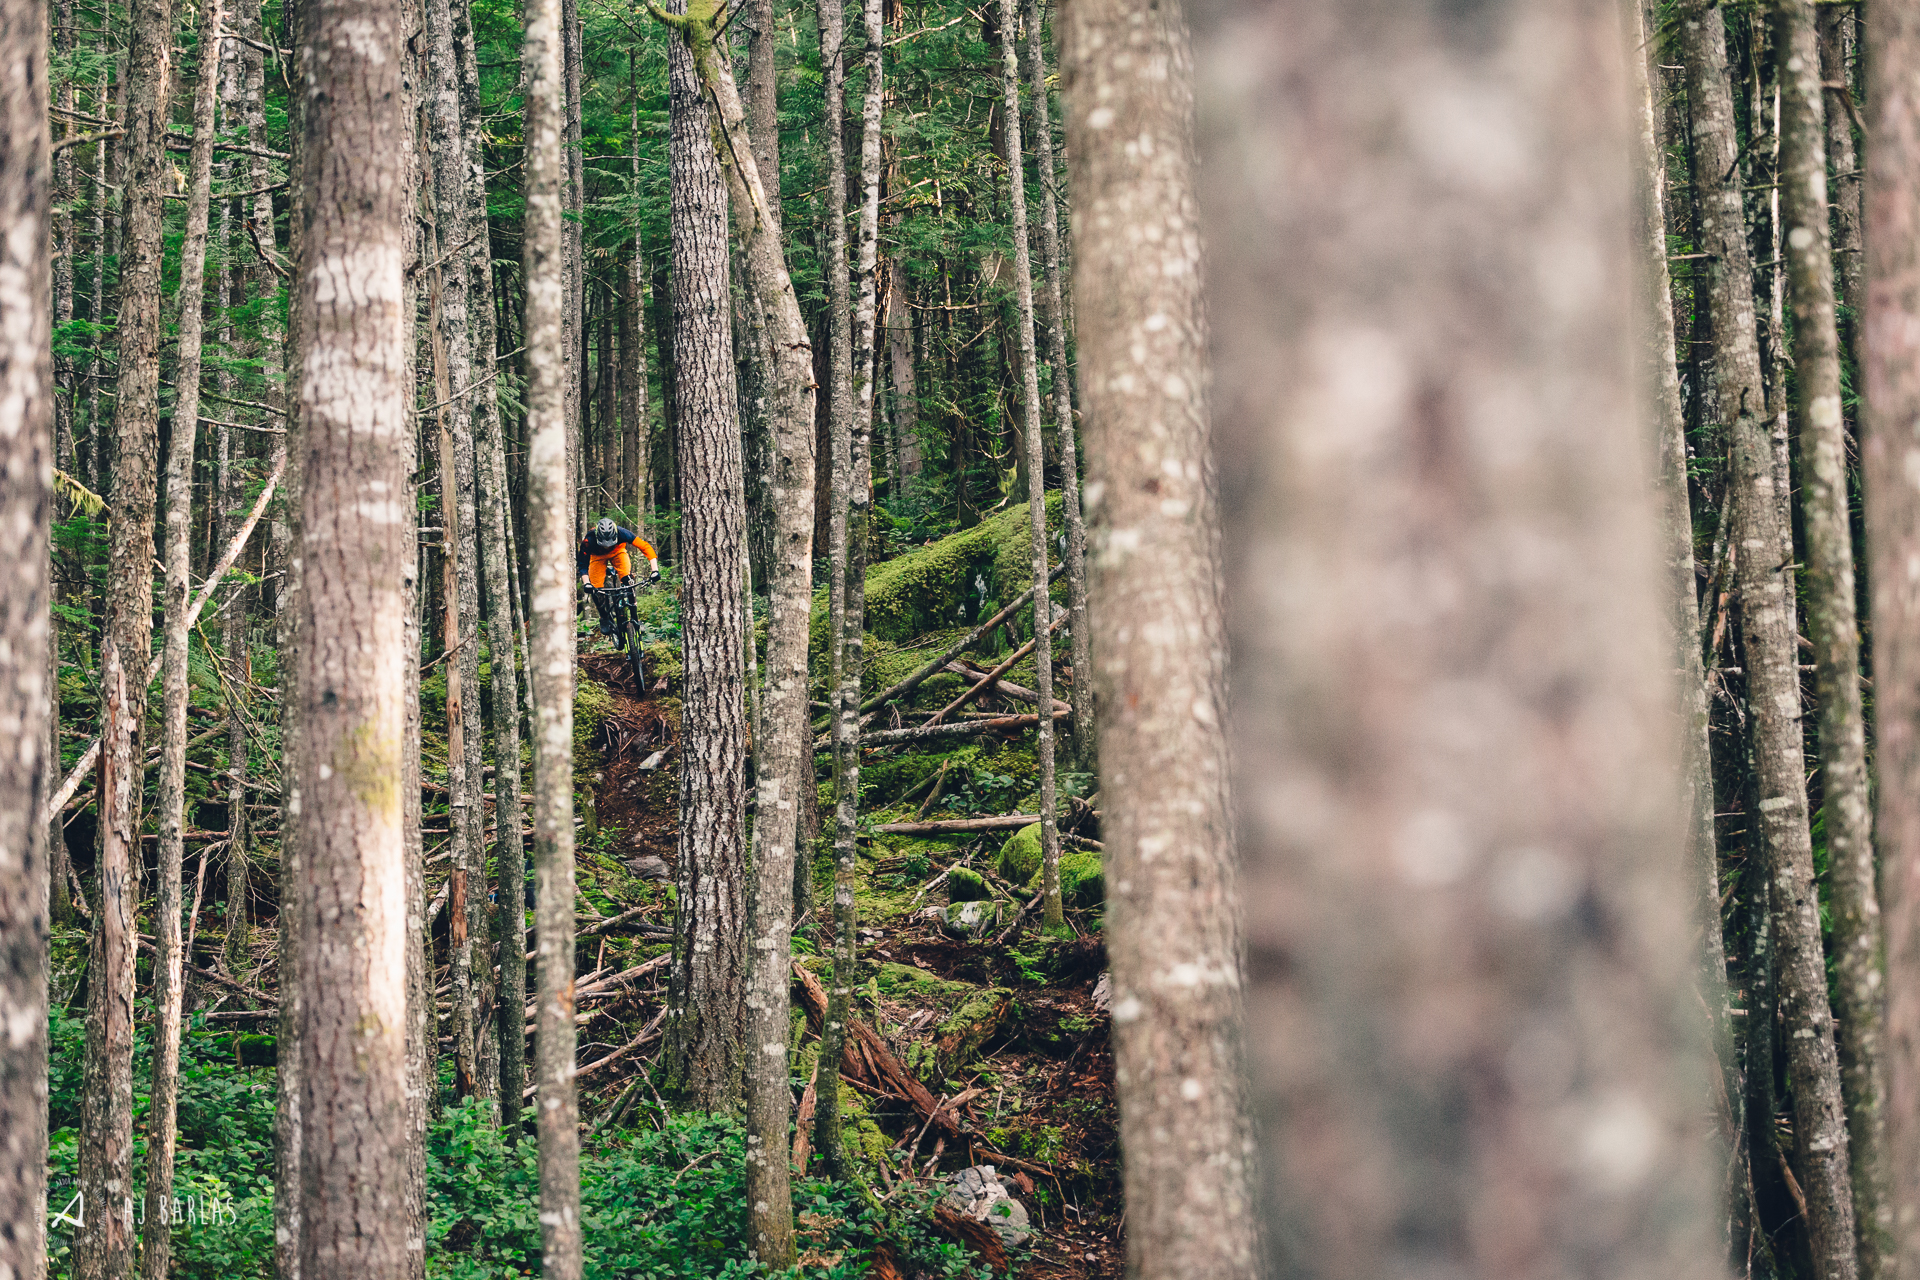 Jessie Mcauley deep in the woods of Squamish